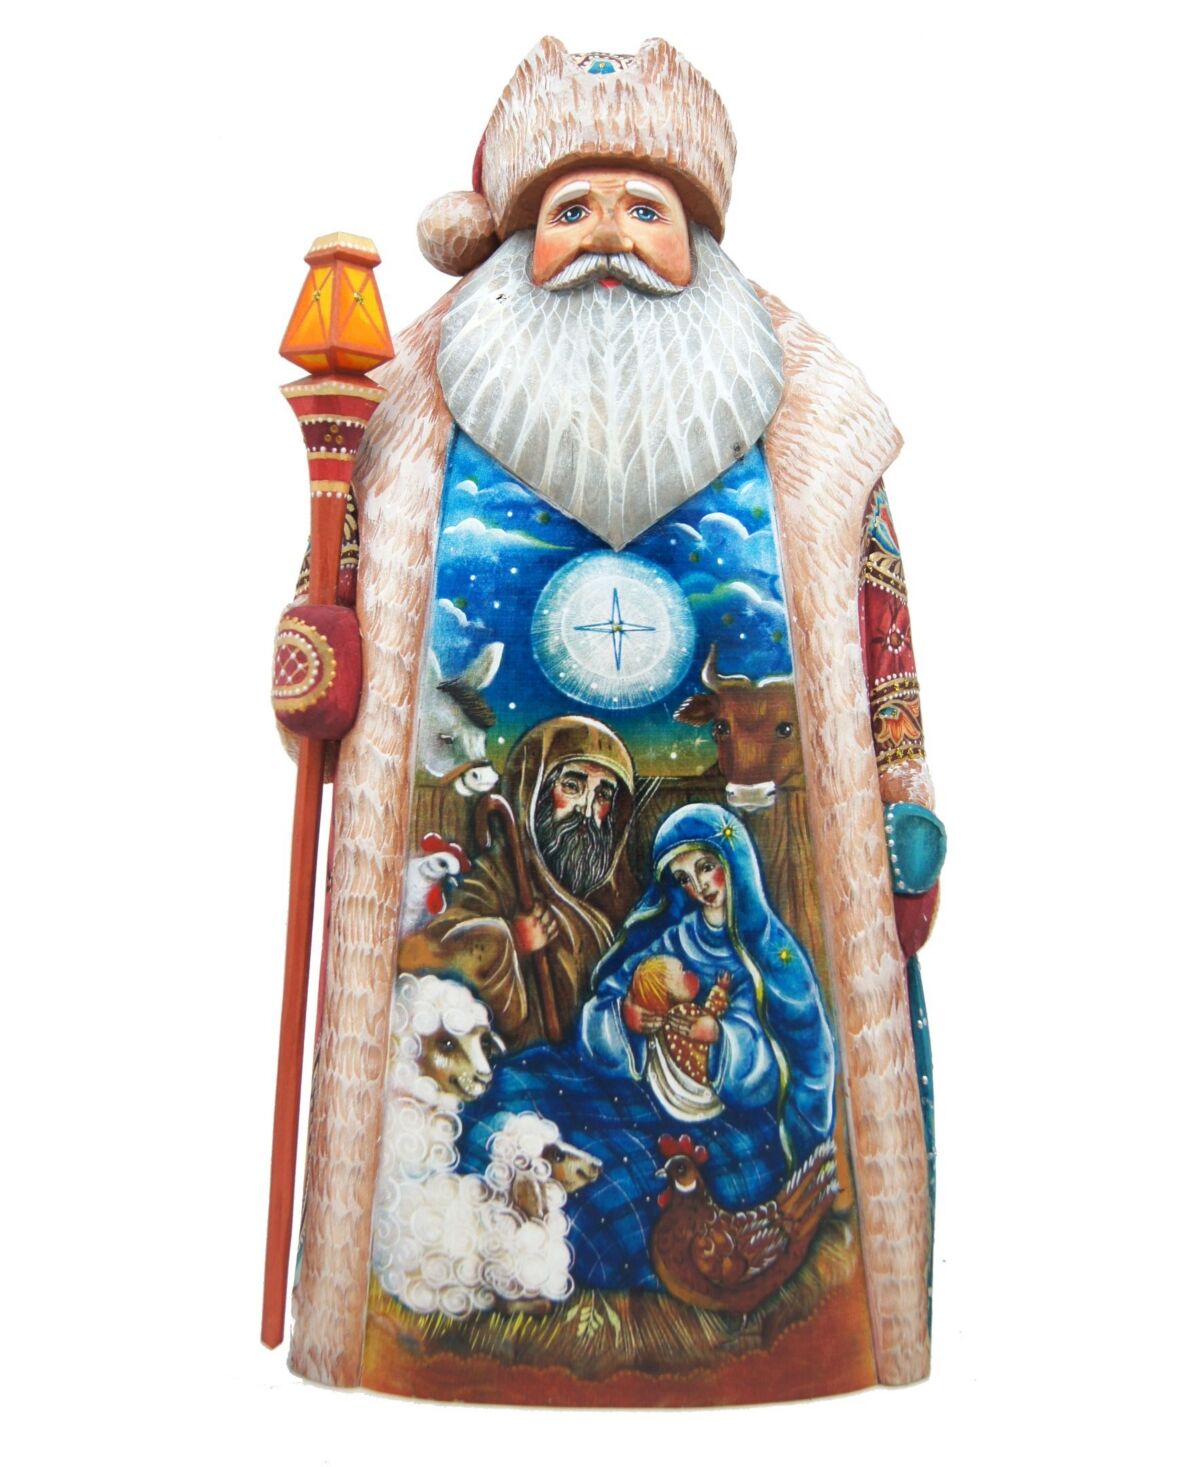 G.DeBrekht Woodcarved Nativity Special Edition Santa In Crate Figurine - Multi